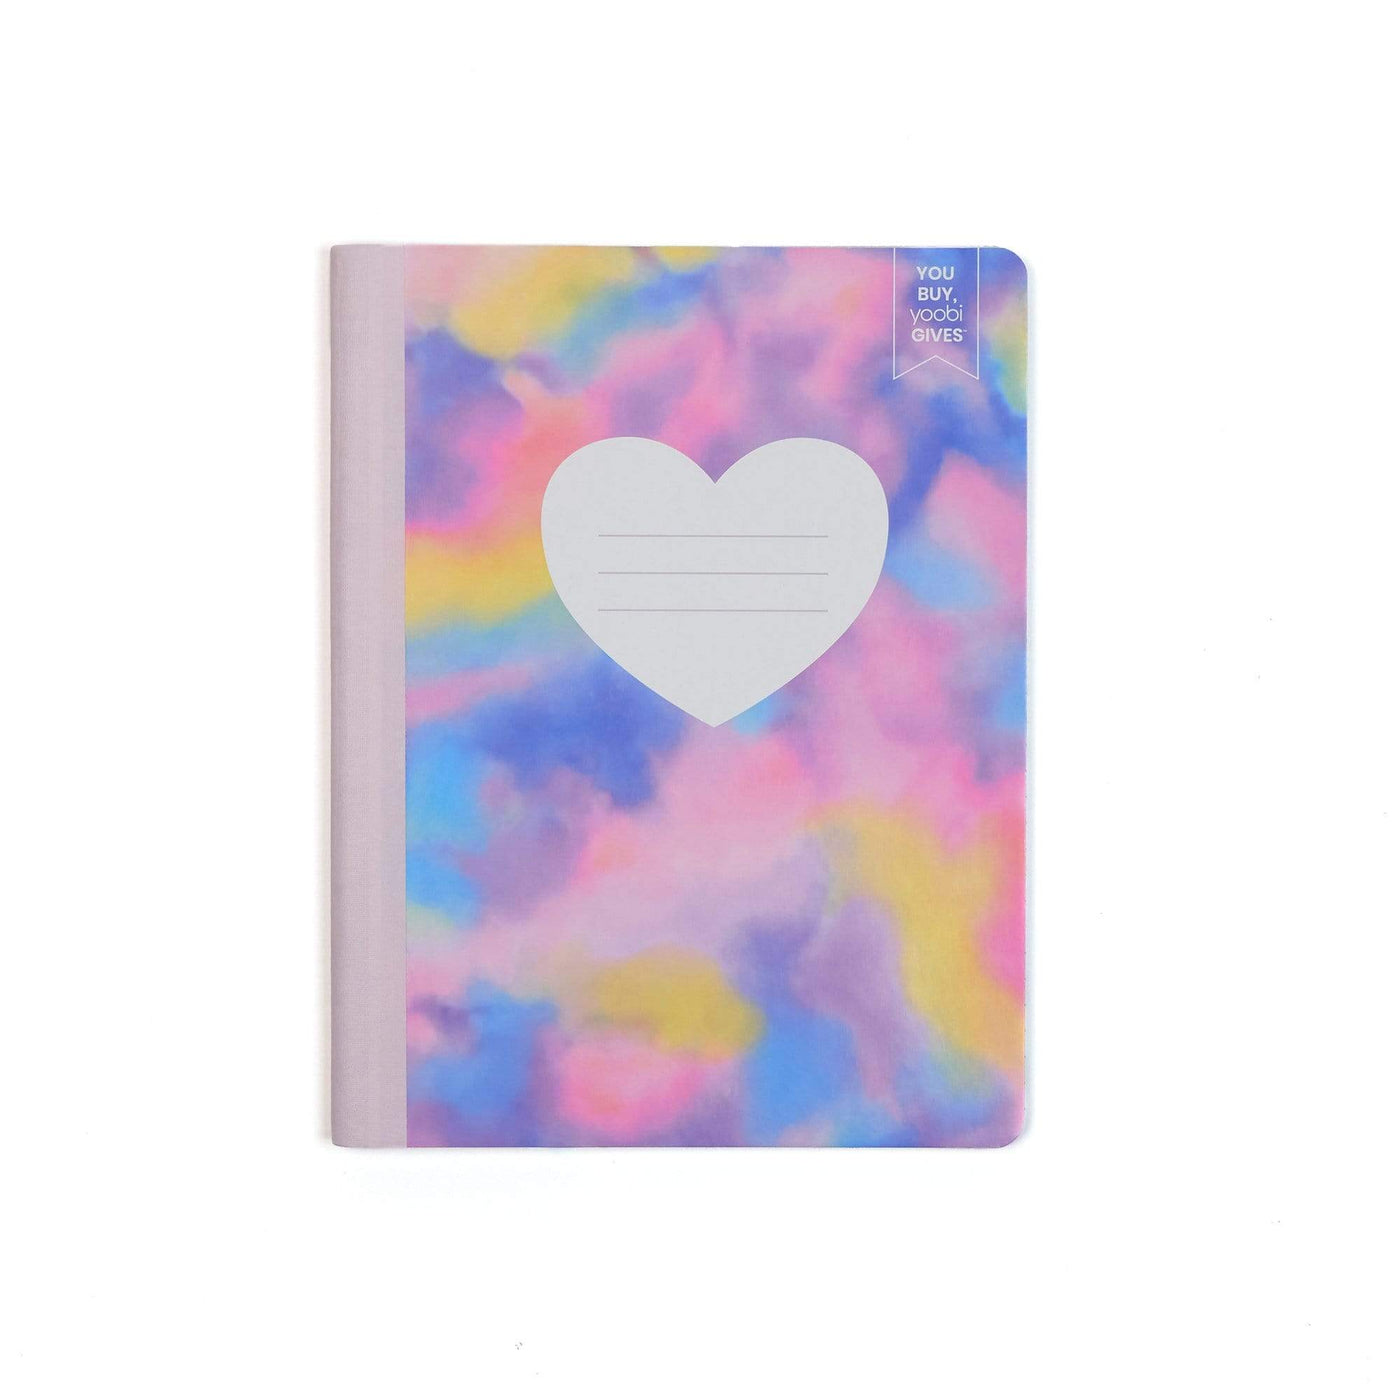 tie-dye composition book with heart shaped label on front cover